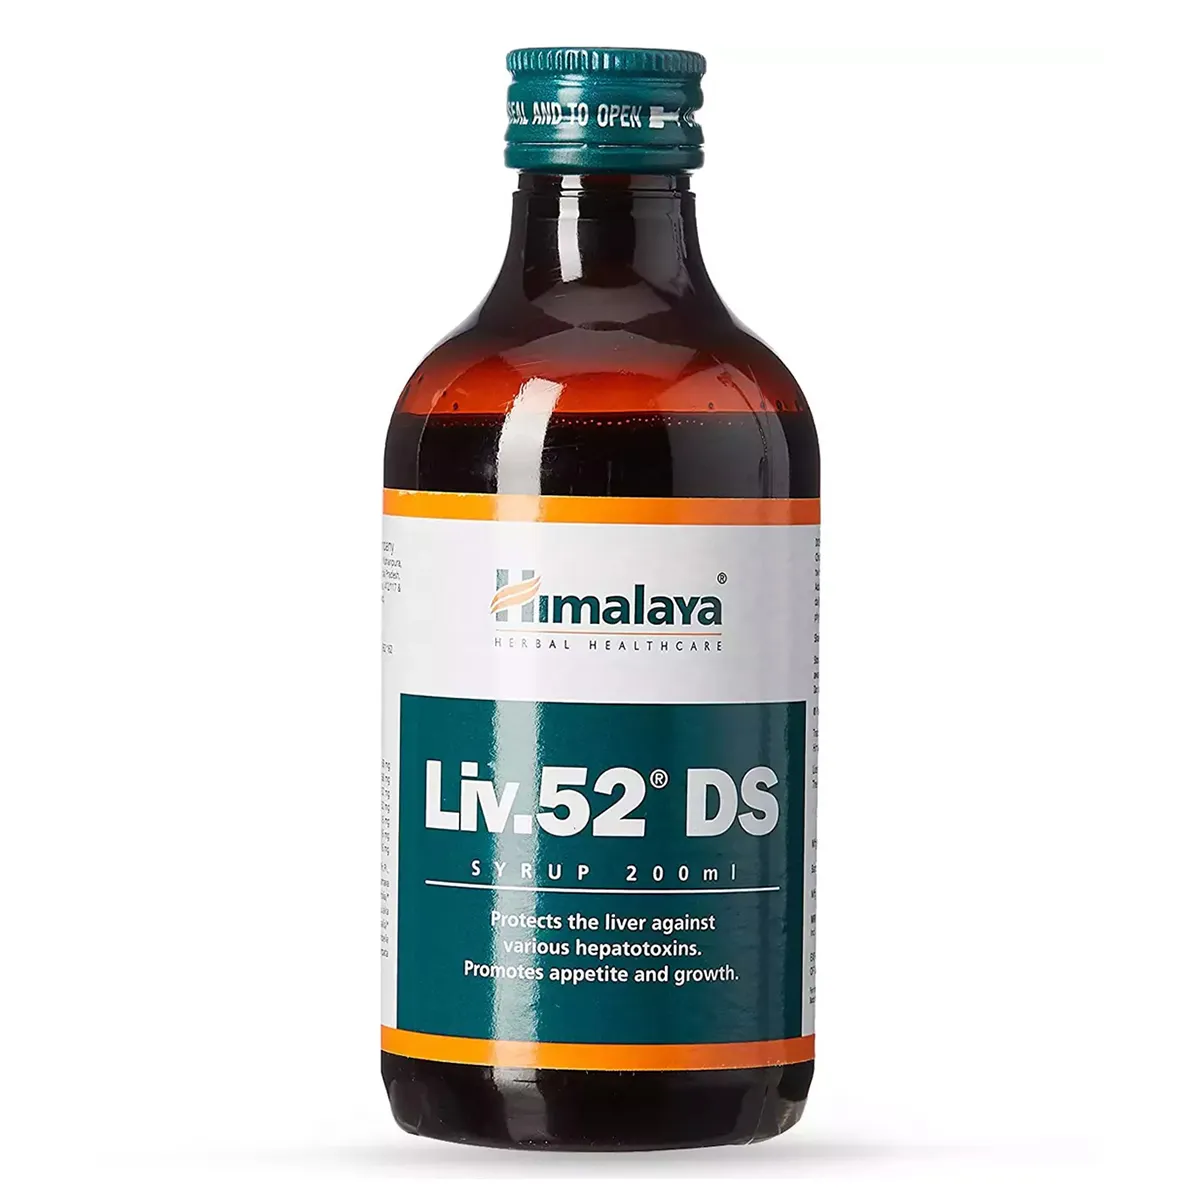 Himalaya Liv.52 Ds Syrup, 200 ml Price, Uses, Side Effects, Composition -  Apollo Pharmacy